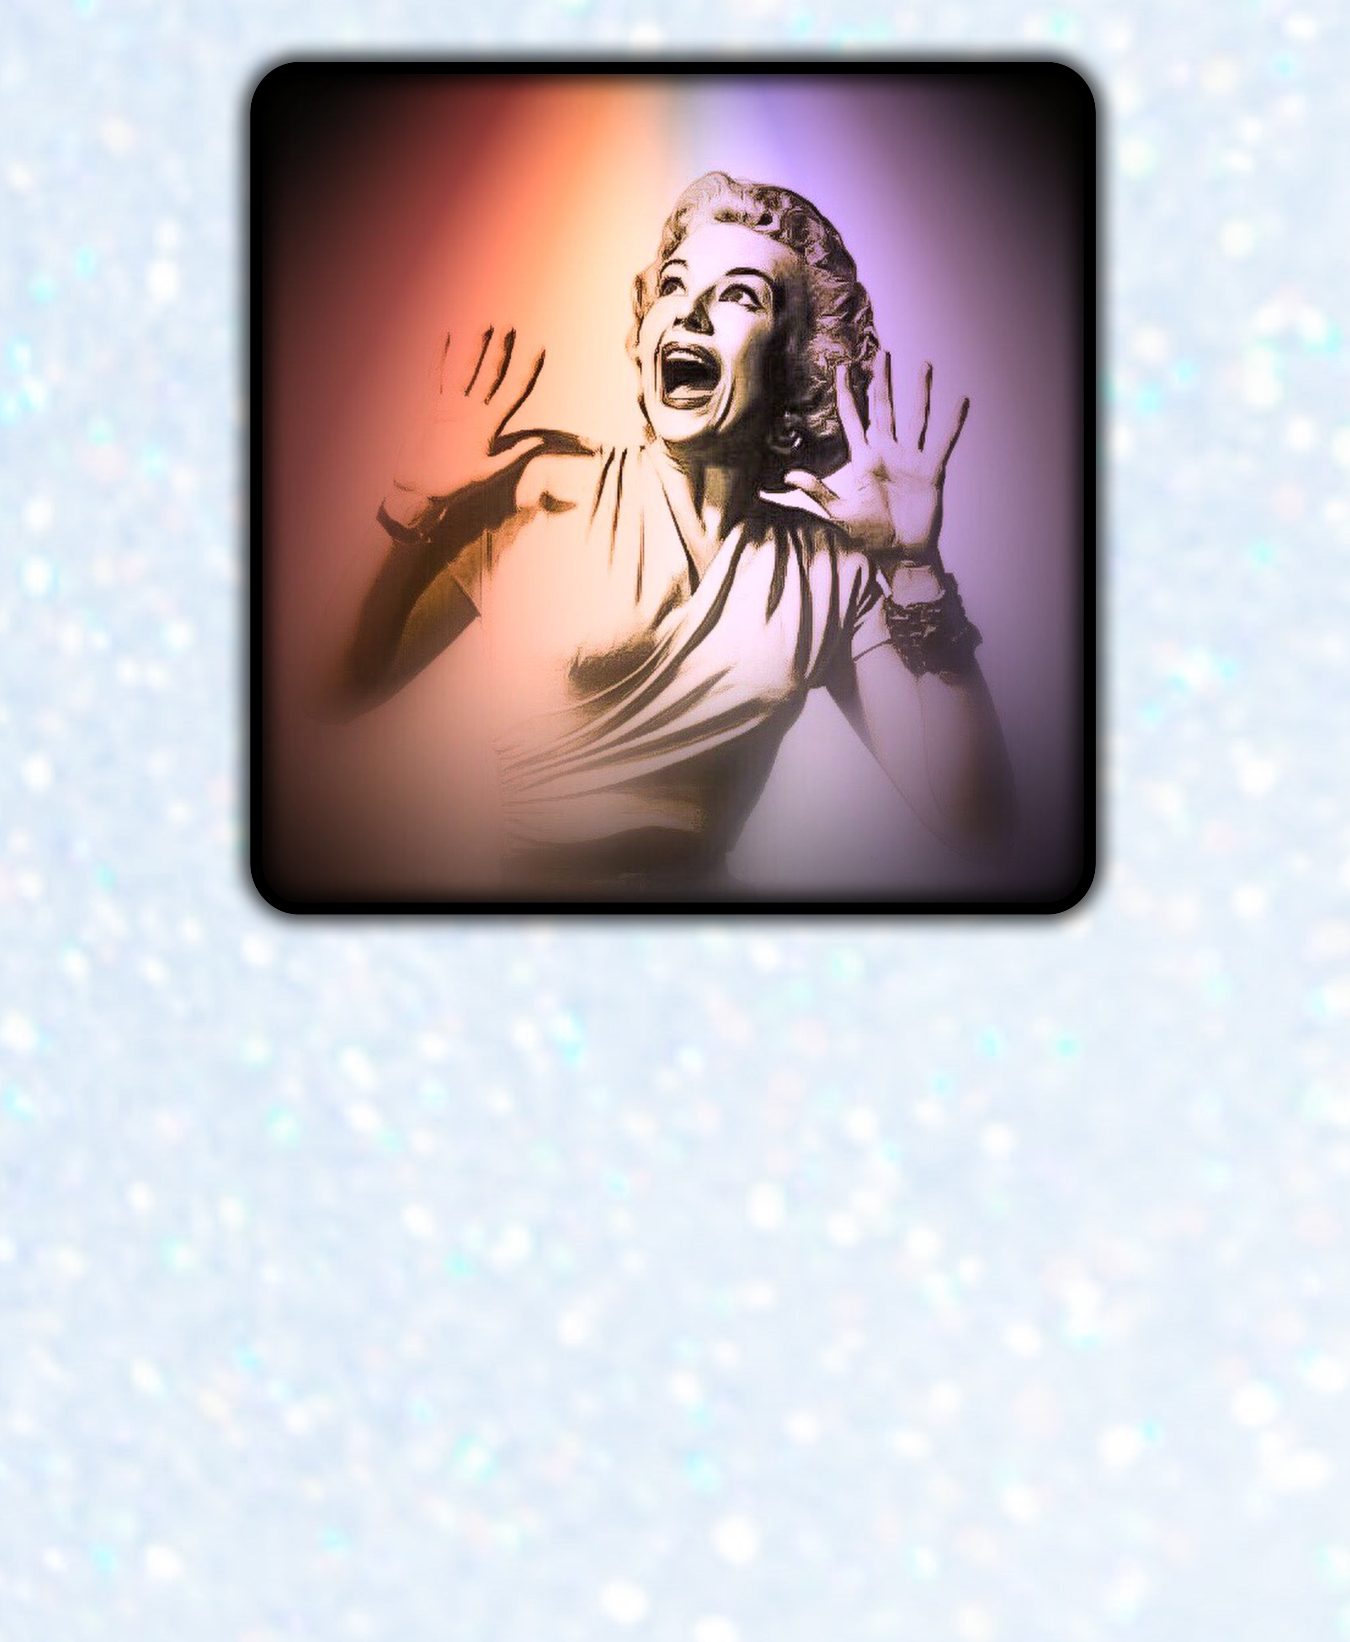 Apple Watch Face of Woman Screaming. Custom made for setting the time on the bottom.